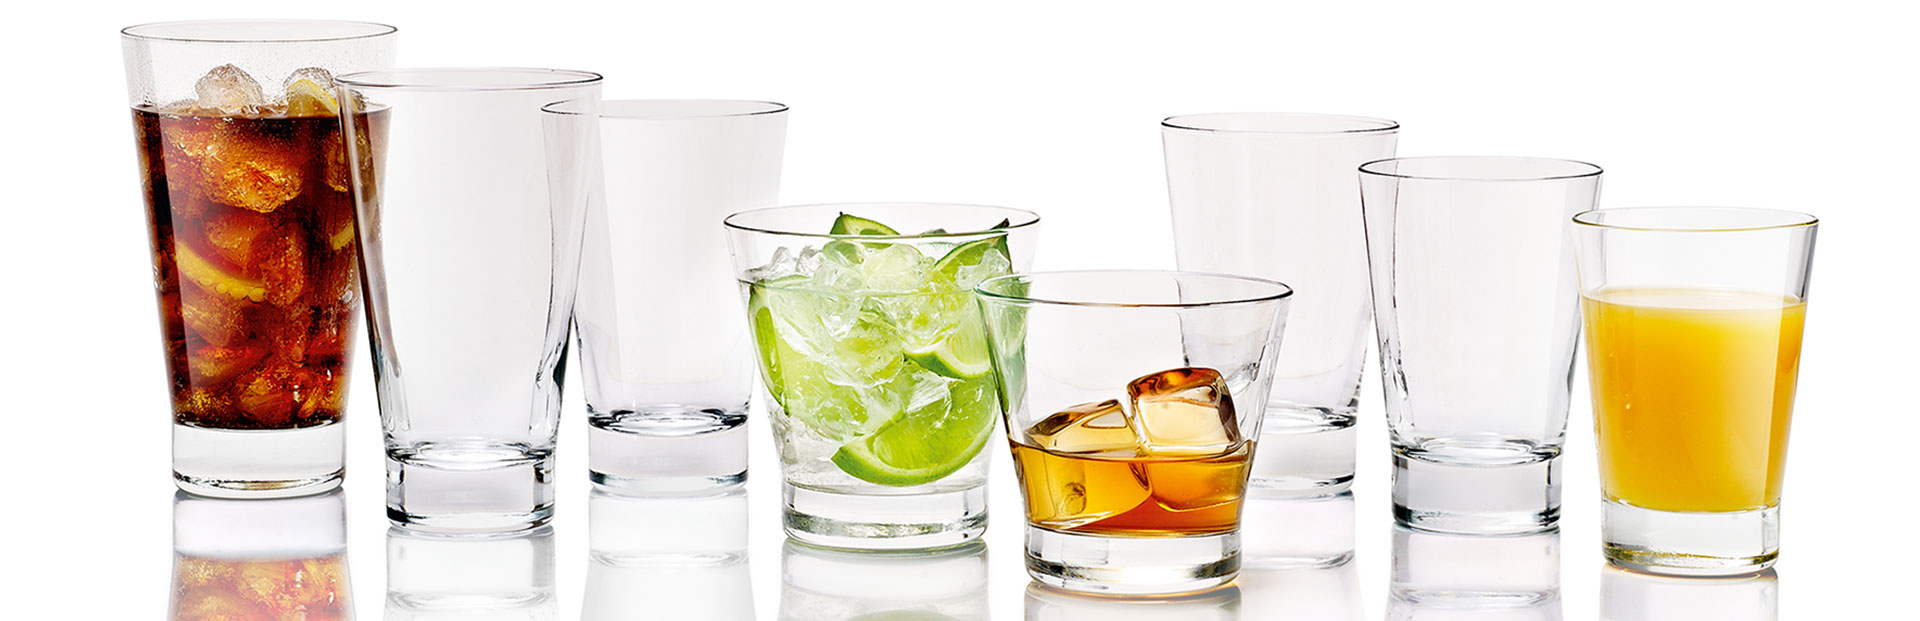 Commercial Drinkware and the Best Types of Glasses - Buying Guides